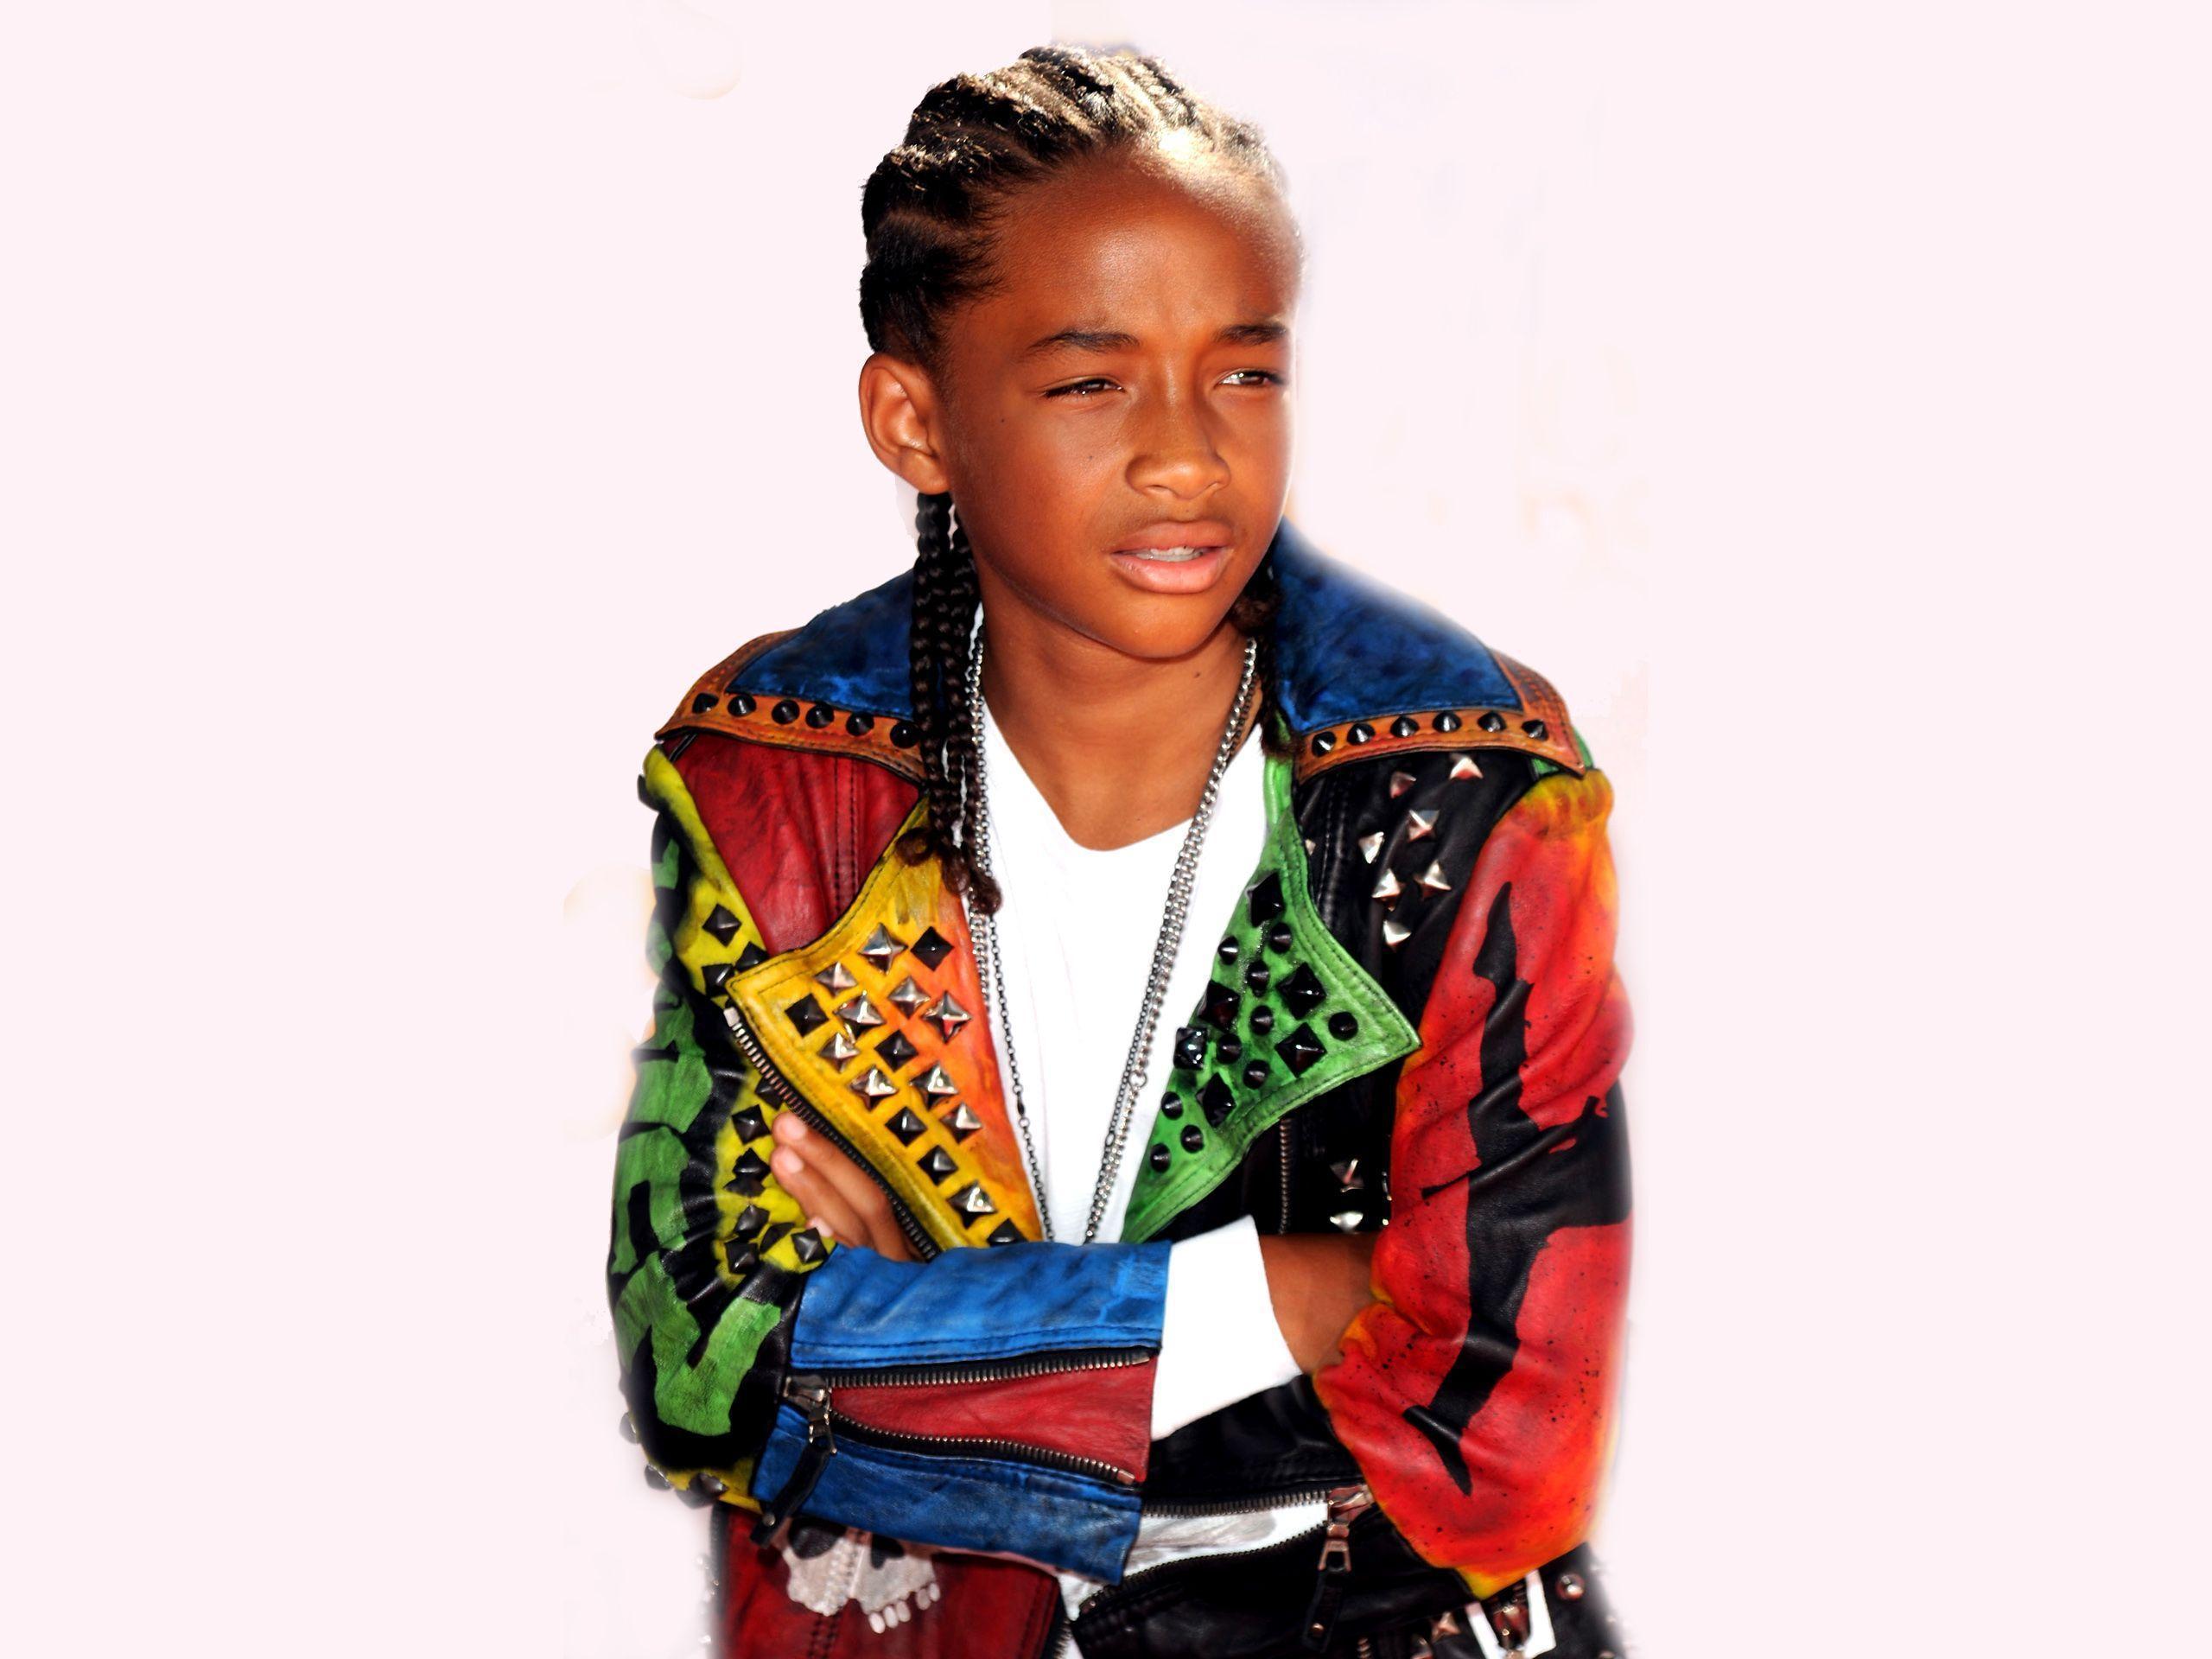 Jaden Smith Wallpaper High Resolution and Quality Download